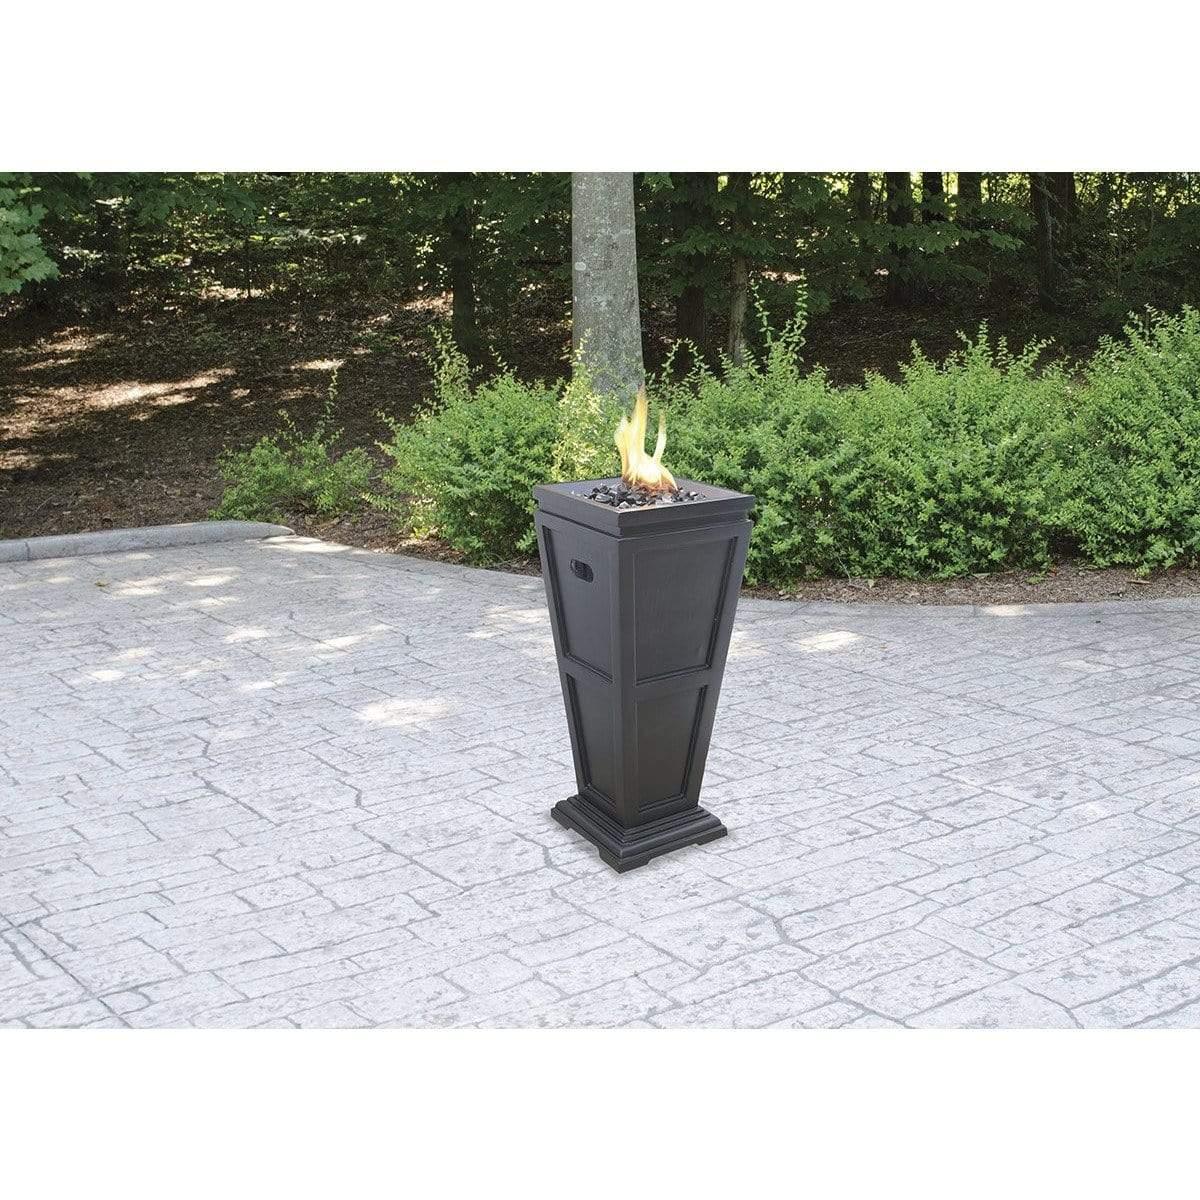 Endless Summer LP Gas Outdoor Fire Column, Large In Slate Finish - GLT1332SP - Fire Pit Stock